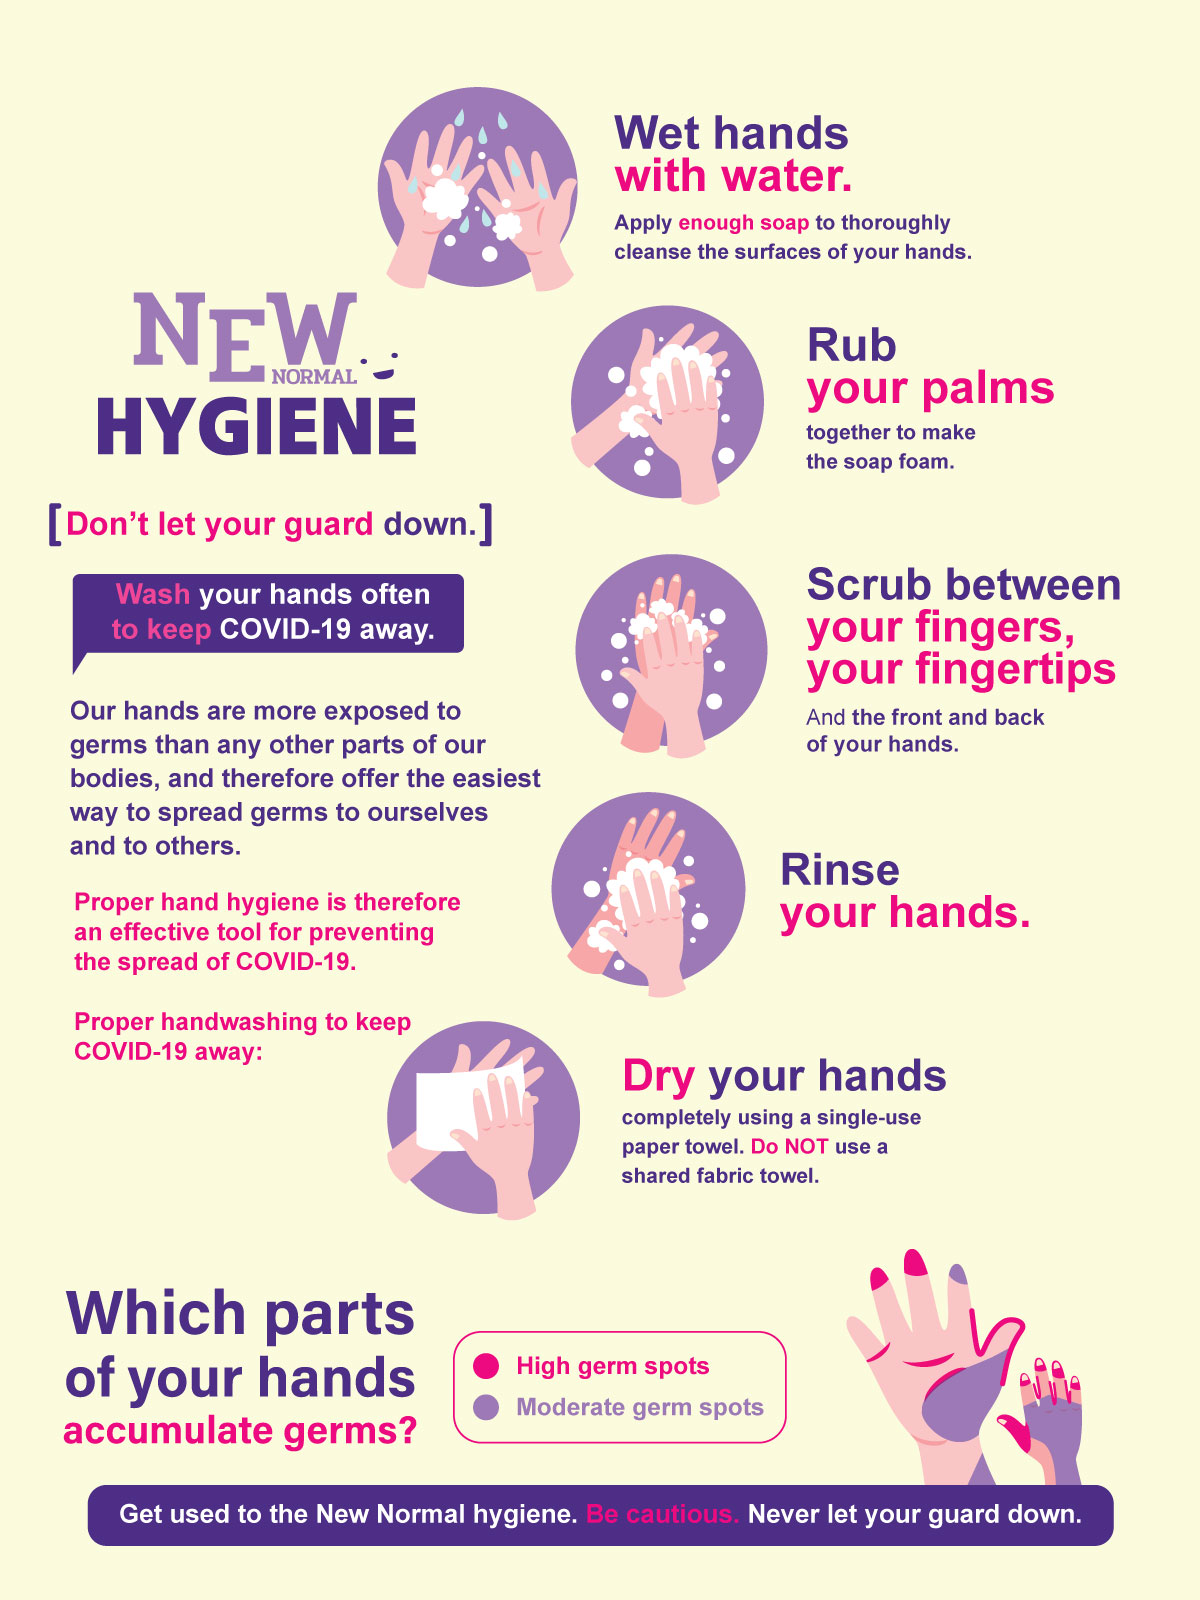 New Normal hygiene: Don’t let your guard down